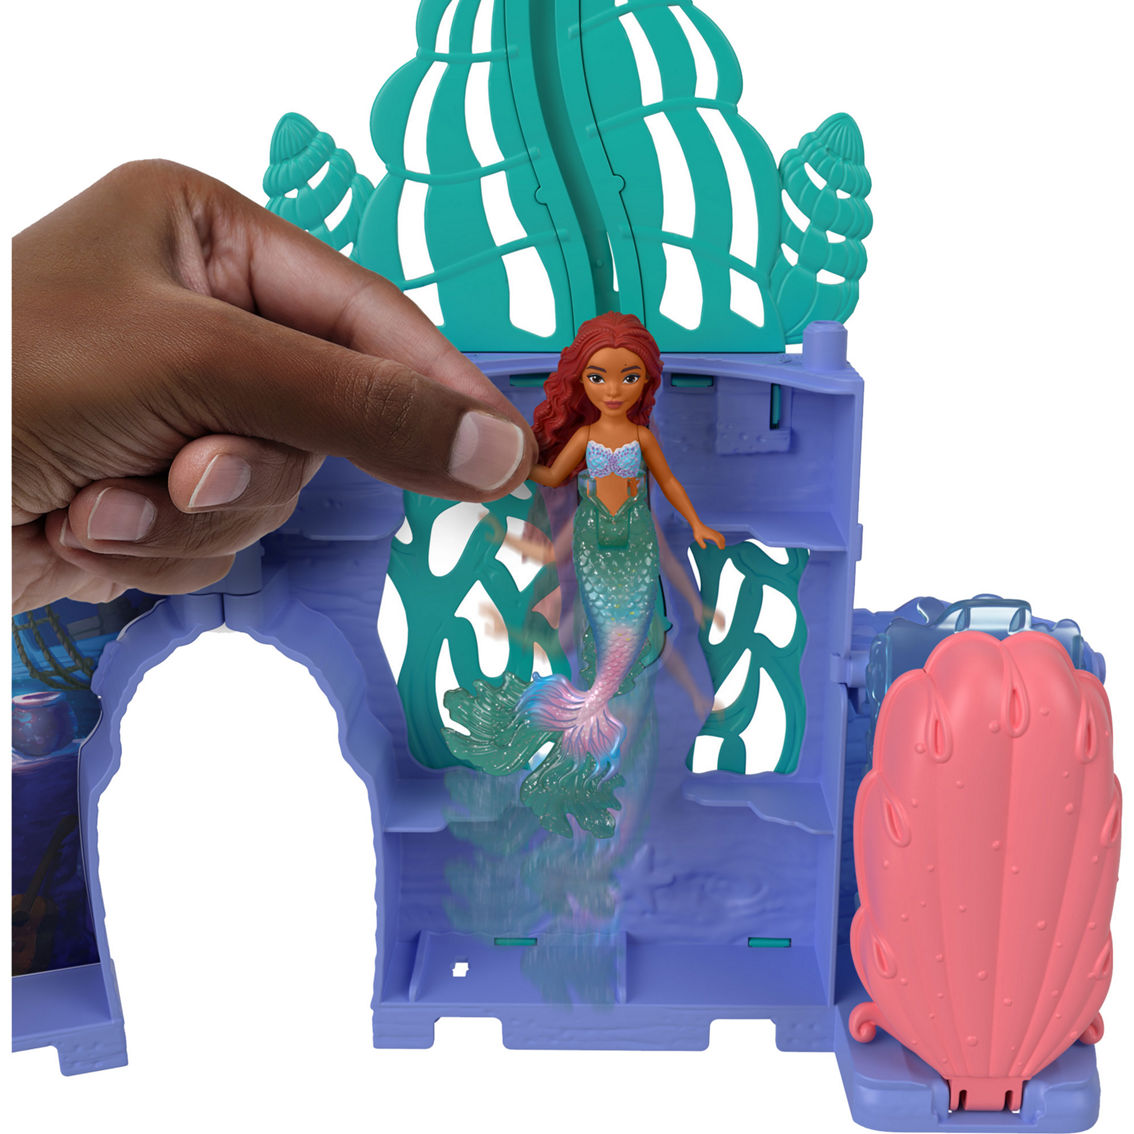 Disney Storytime Stackers The Little Mermaid Ariel's Grotto Small Playset - Image 4 of 10